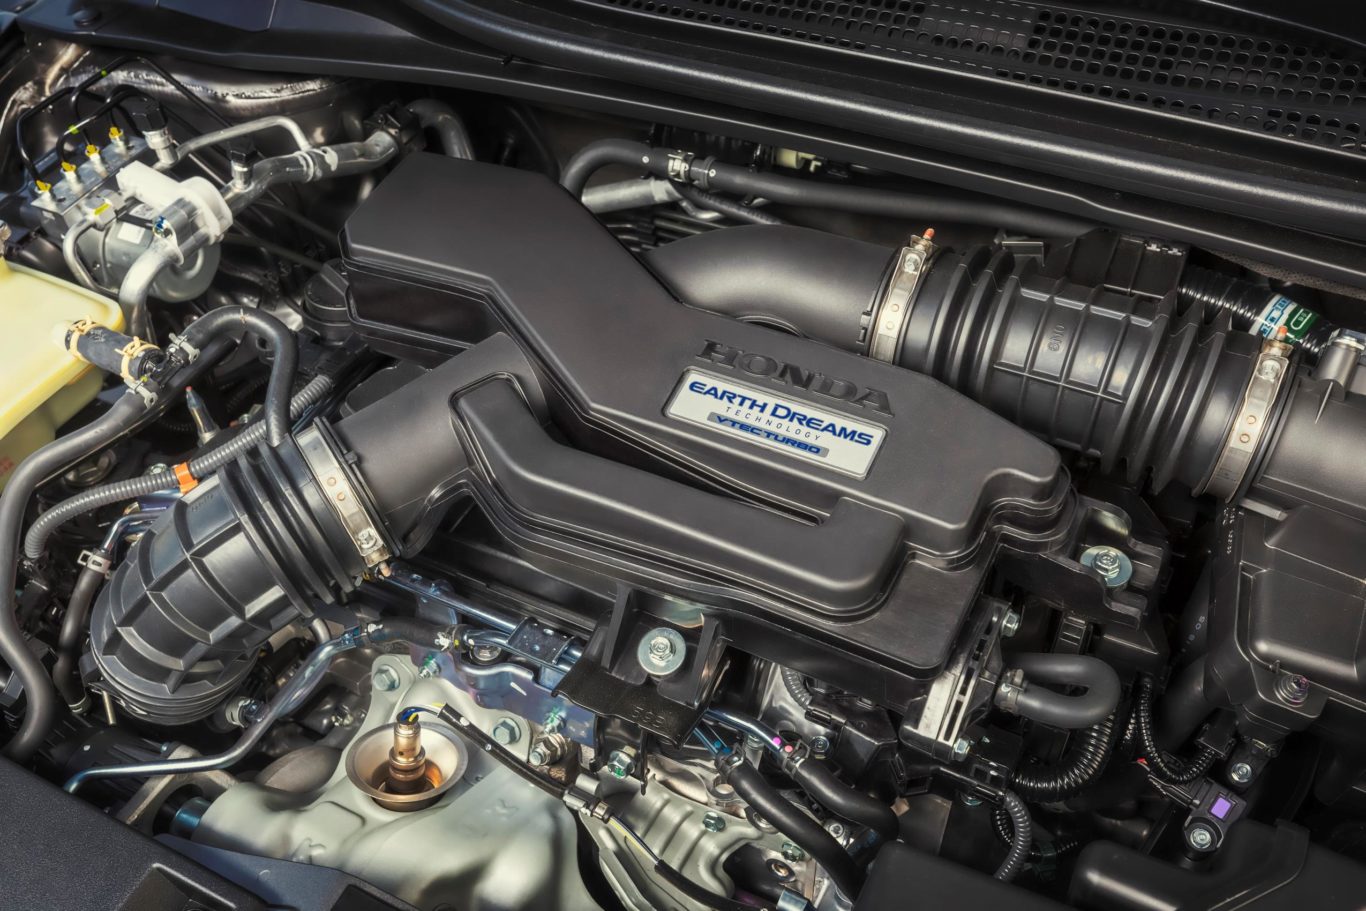 The 1.5-litre petrol engine produces 180bhp